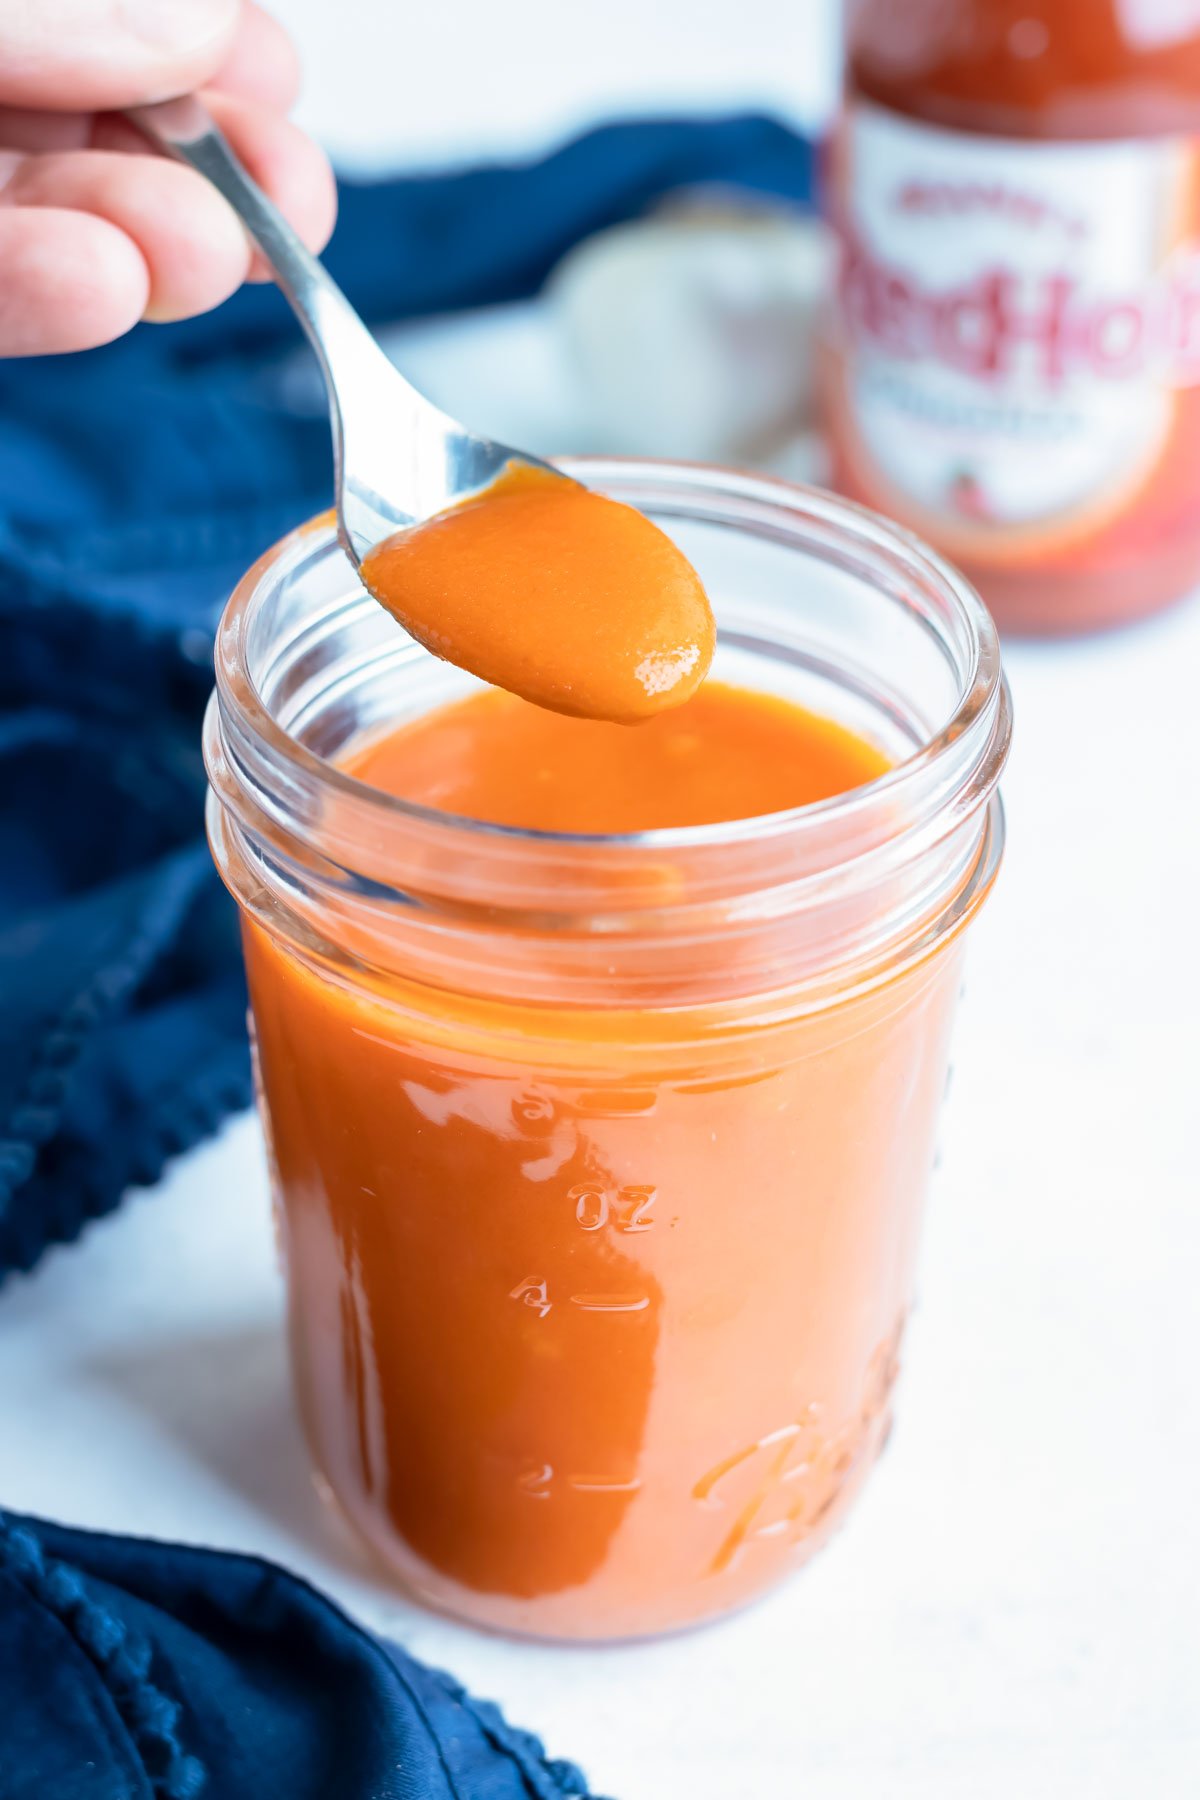 Buffalo sauce is lifted out of a mason jar with a spoon.